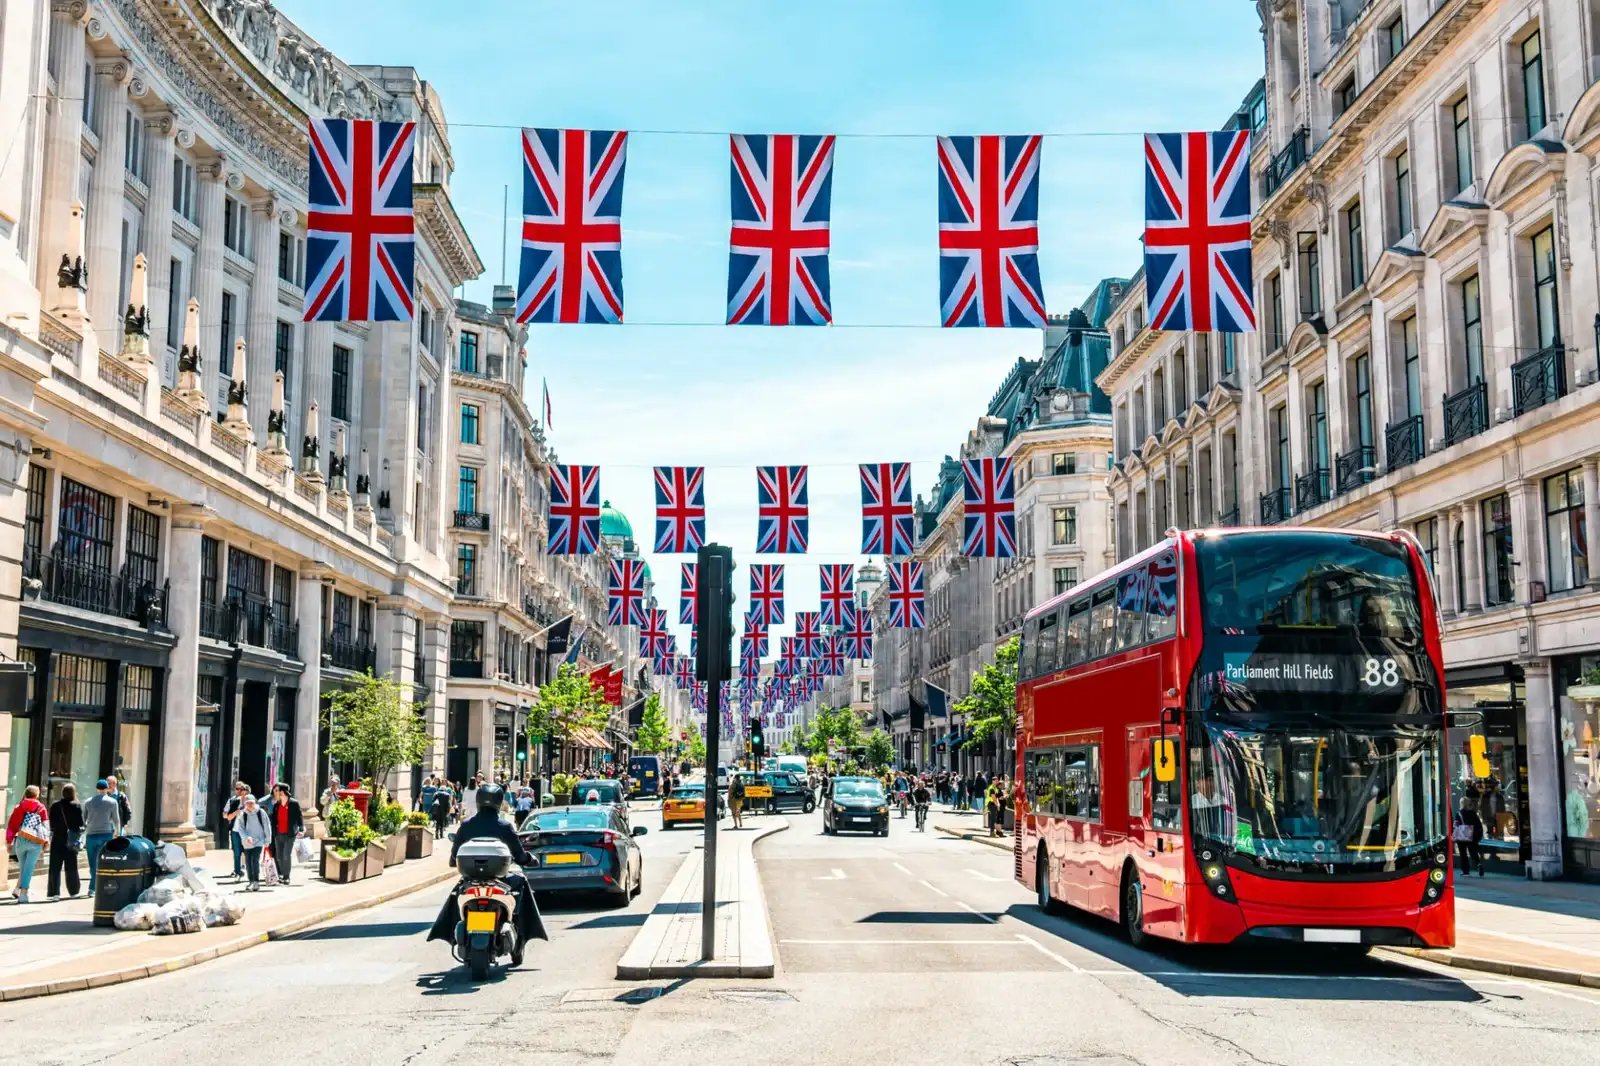 London street adorned with UK flags and a double-decker bus on a sunny day.